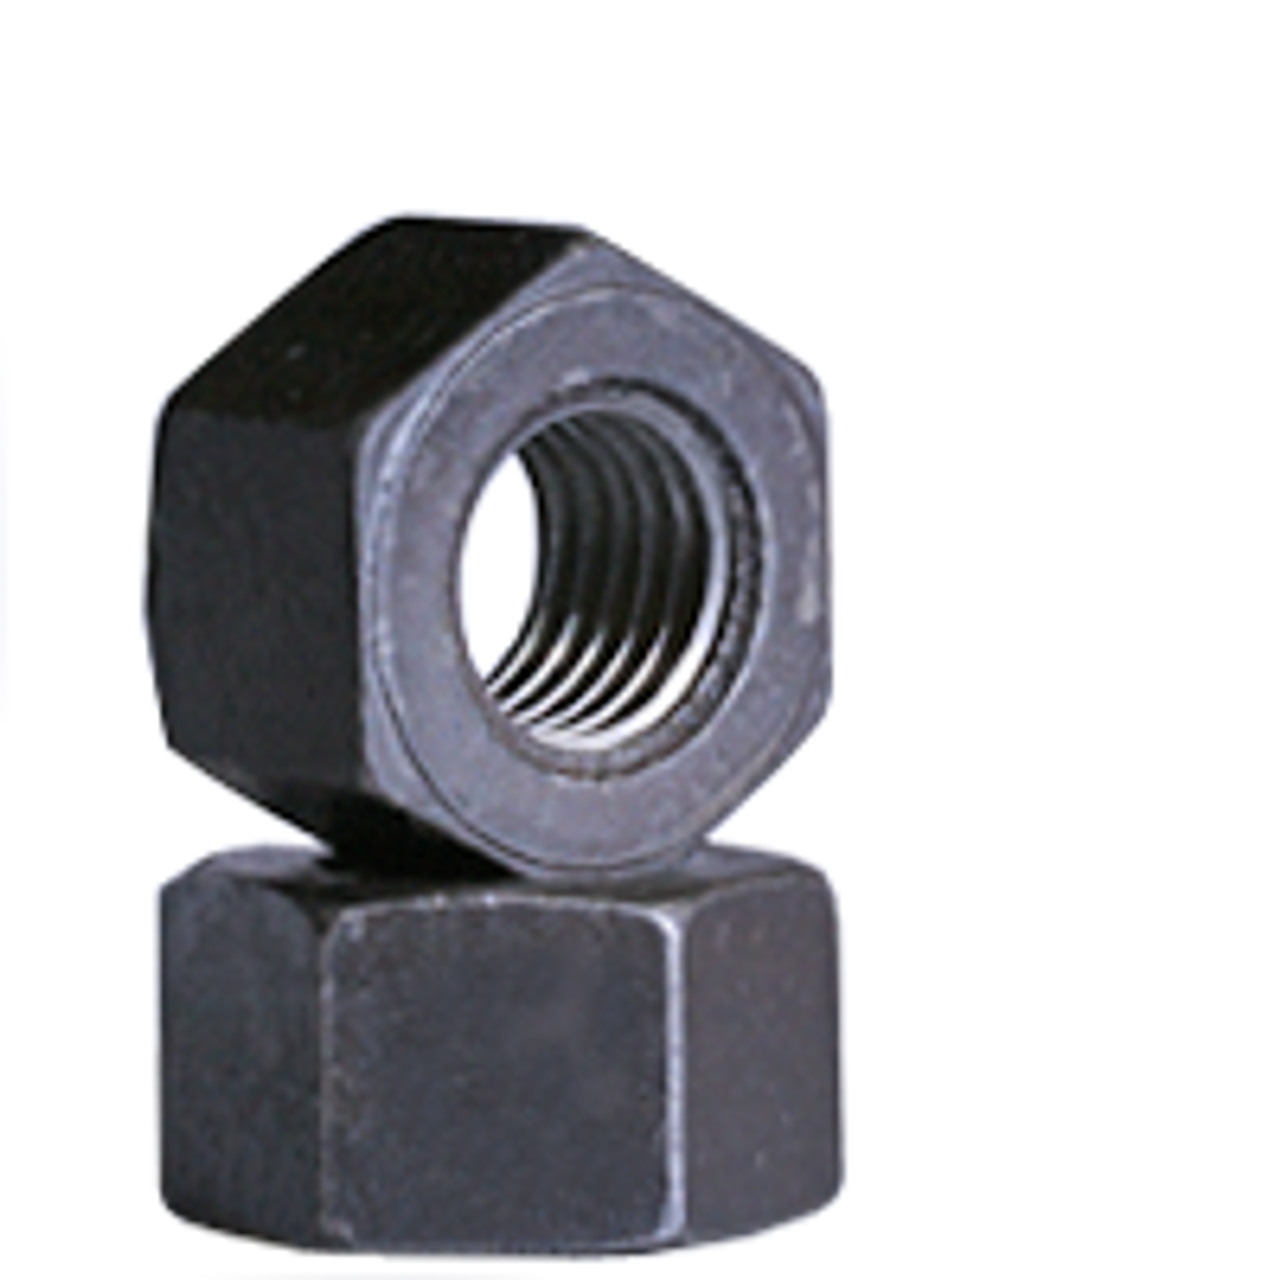 3/4-10 A194 2H Heavy Hex Nut Hot Dipped Galvanized – FMW Fasteners